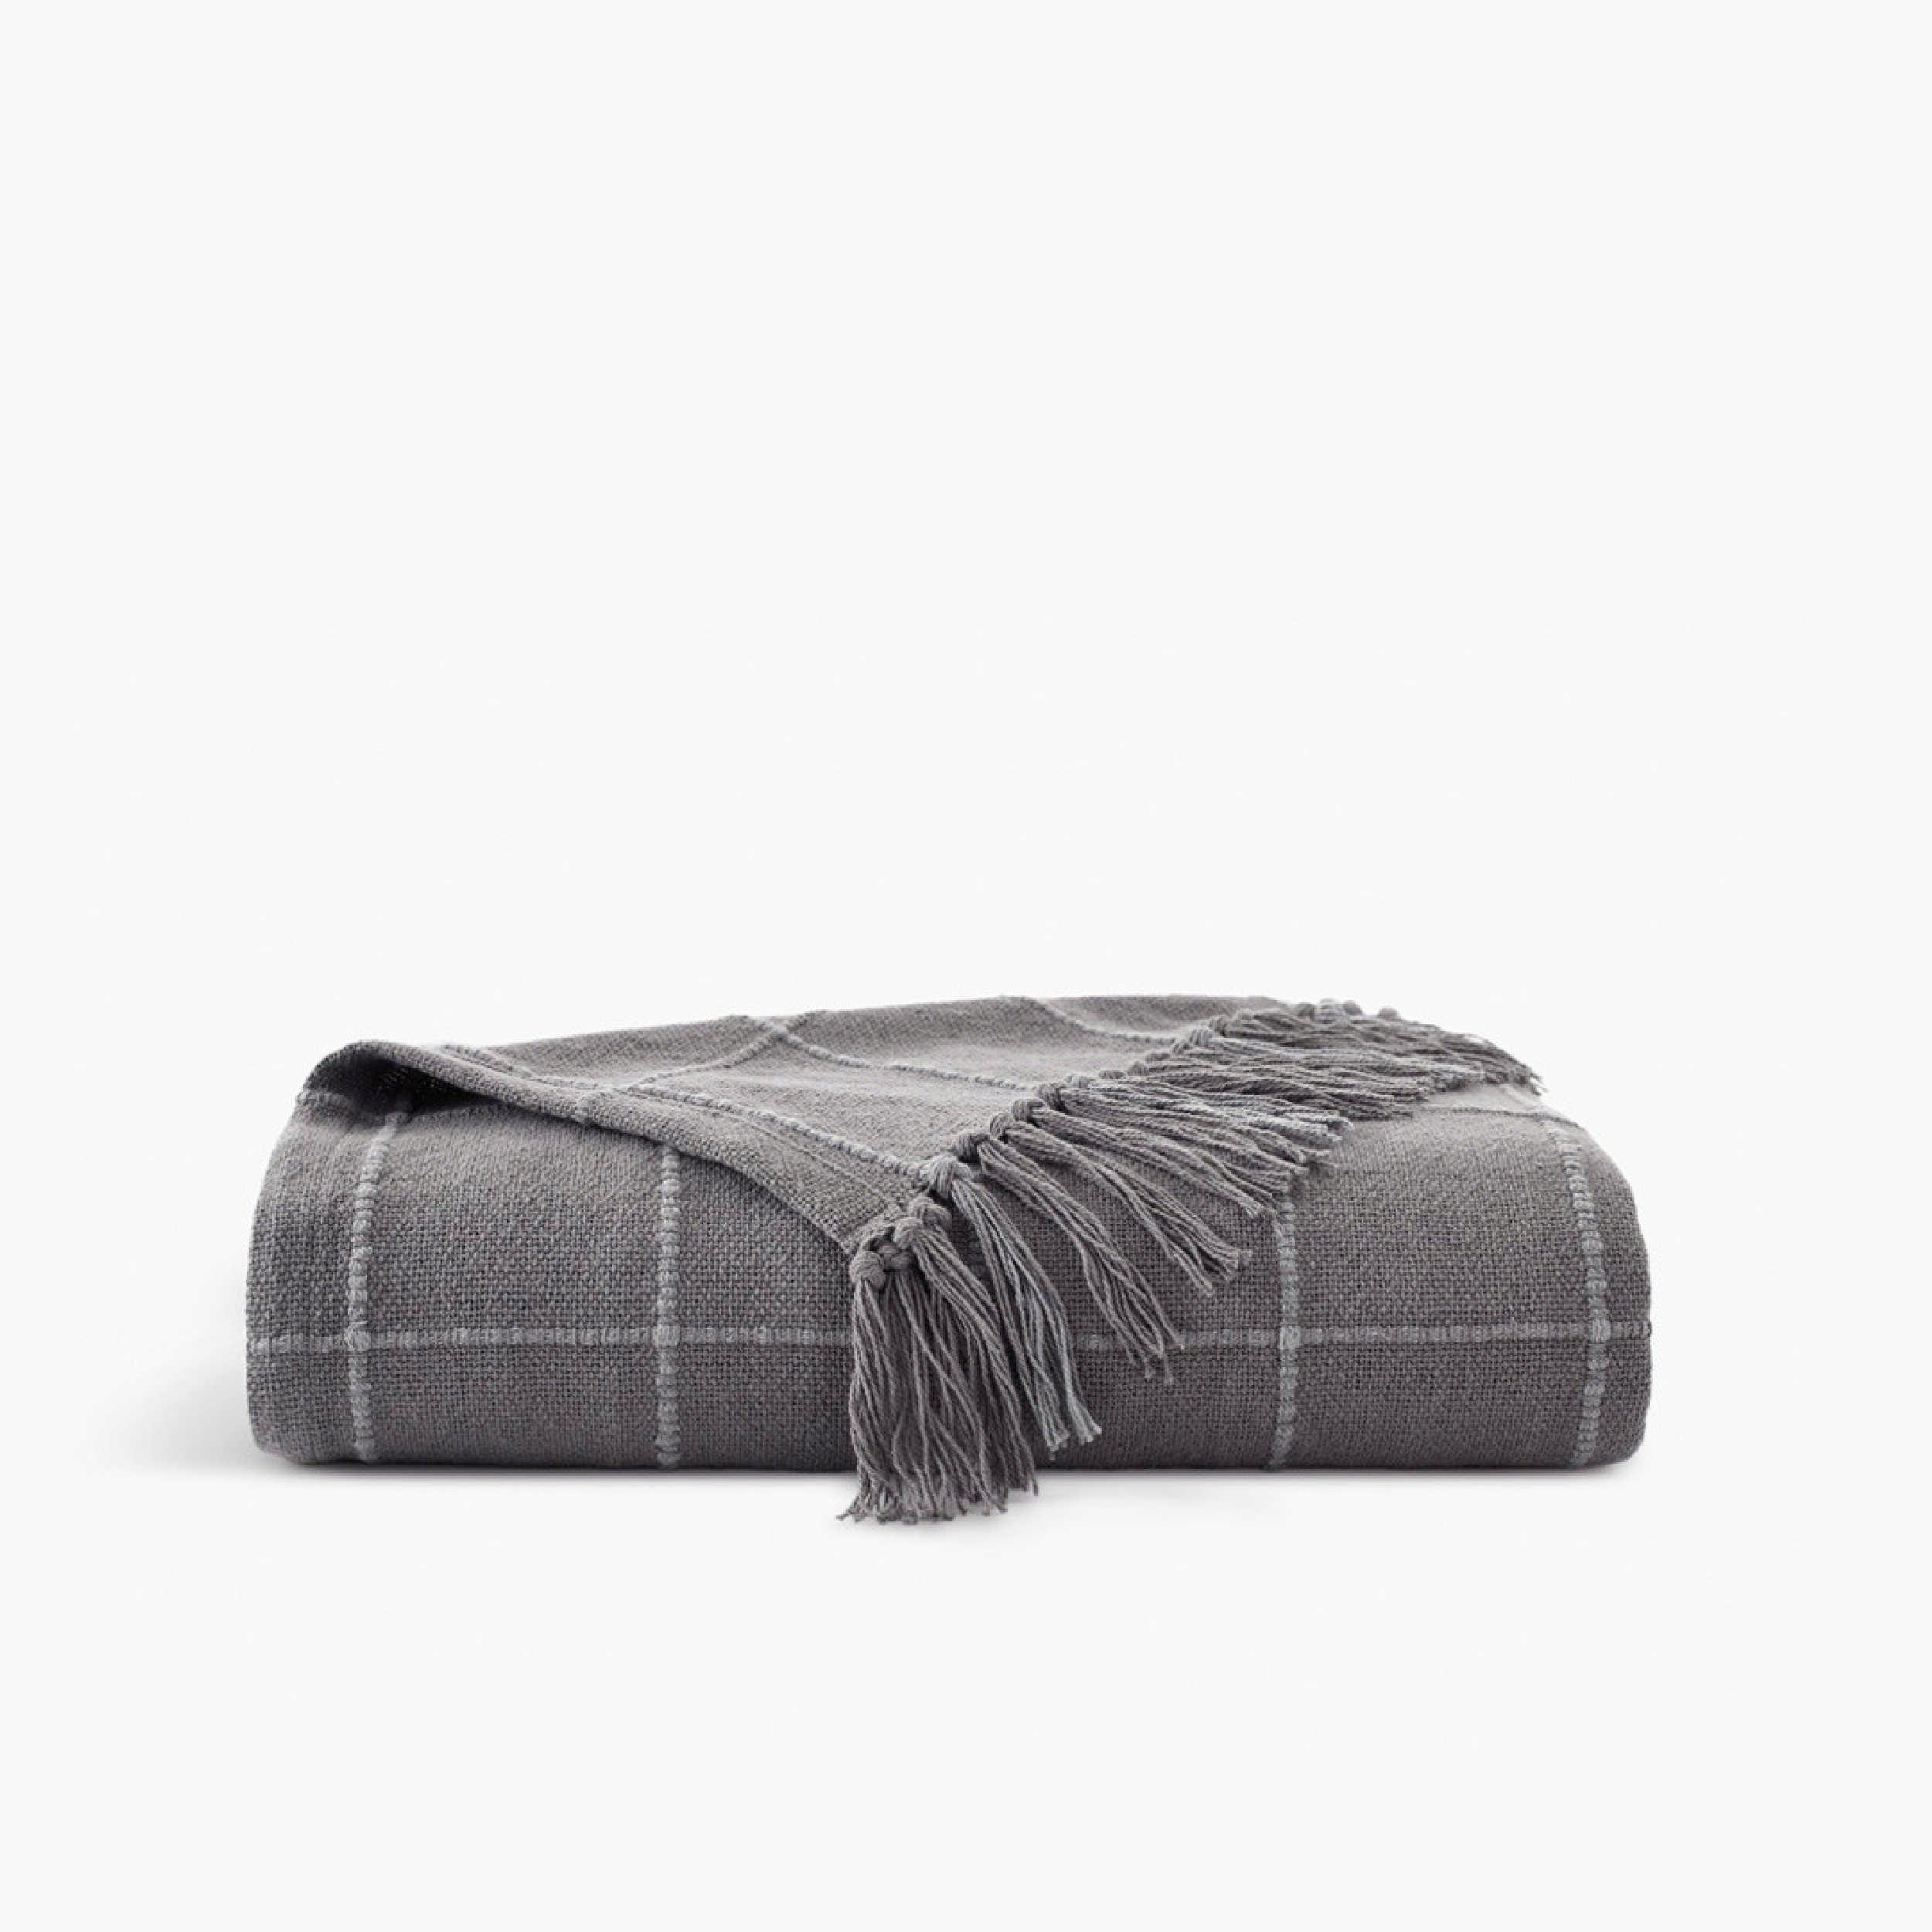 Photos - Other interior and decor Truly Soft Windowpane Organic Throw Blanket.